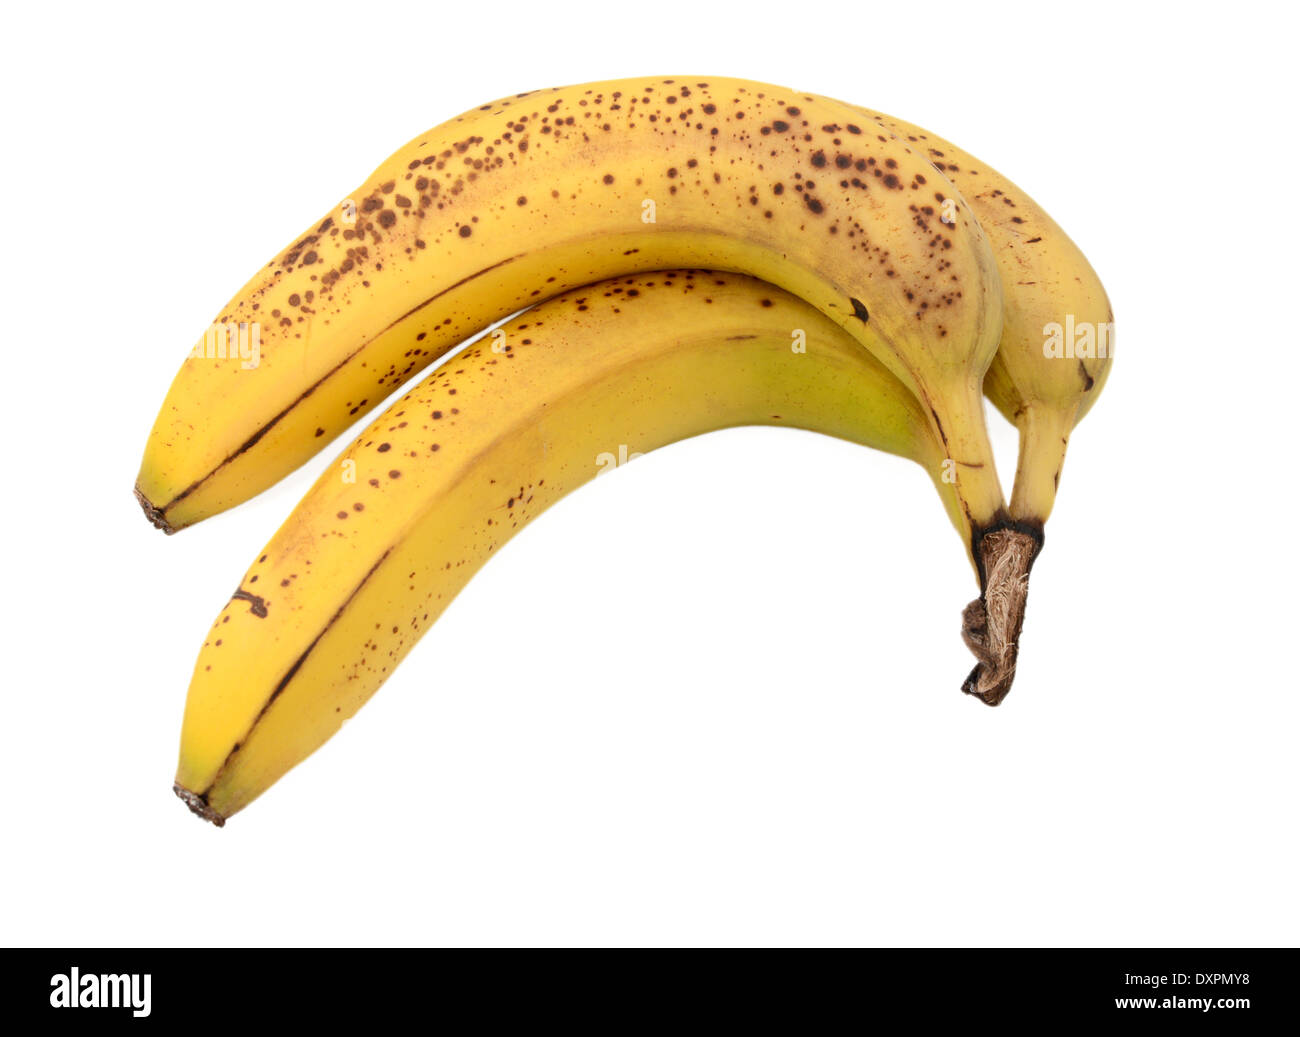 Three overripe bananas with brown spots, isolated on a white background Stock Photo